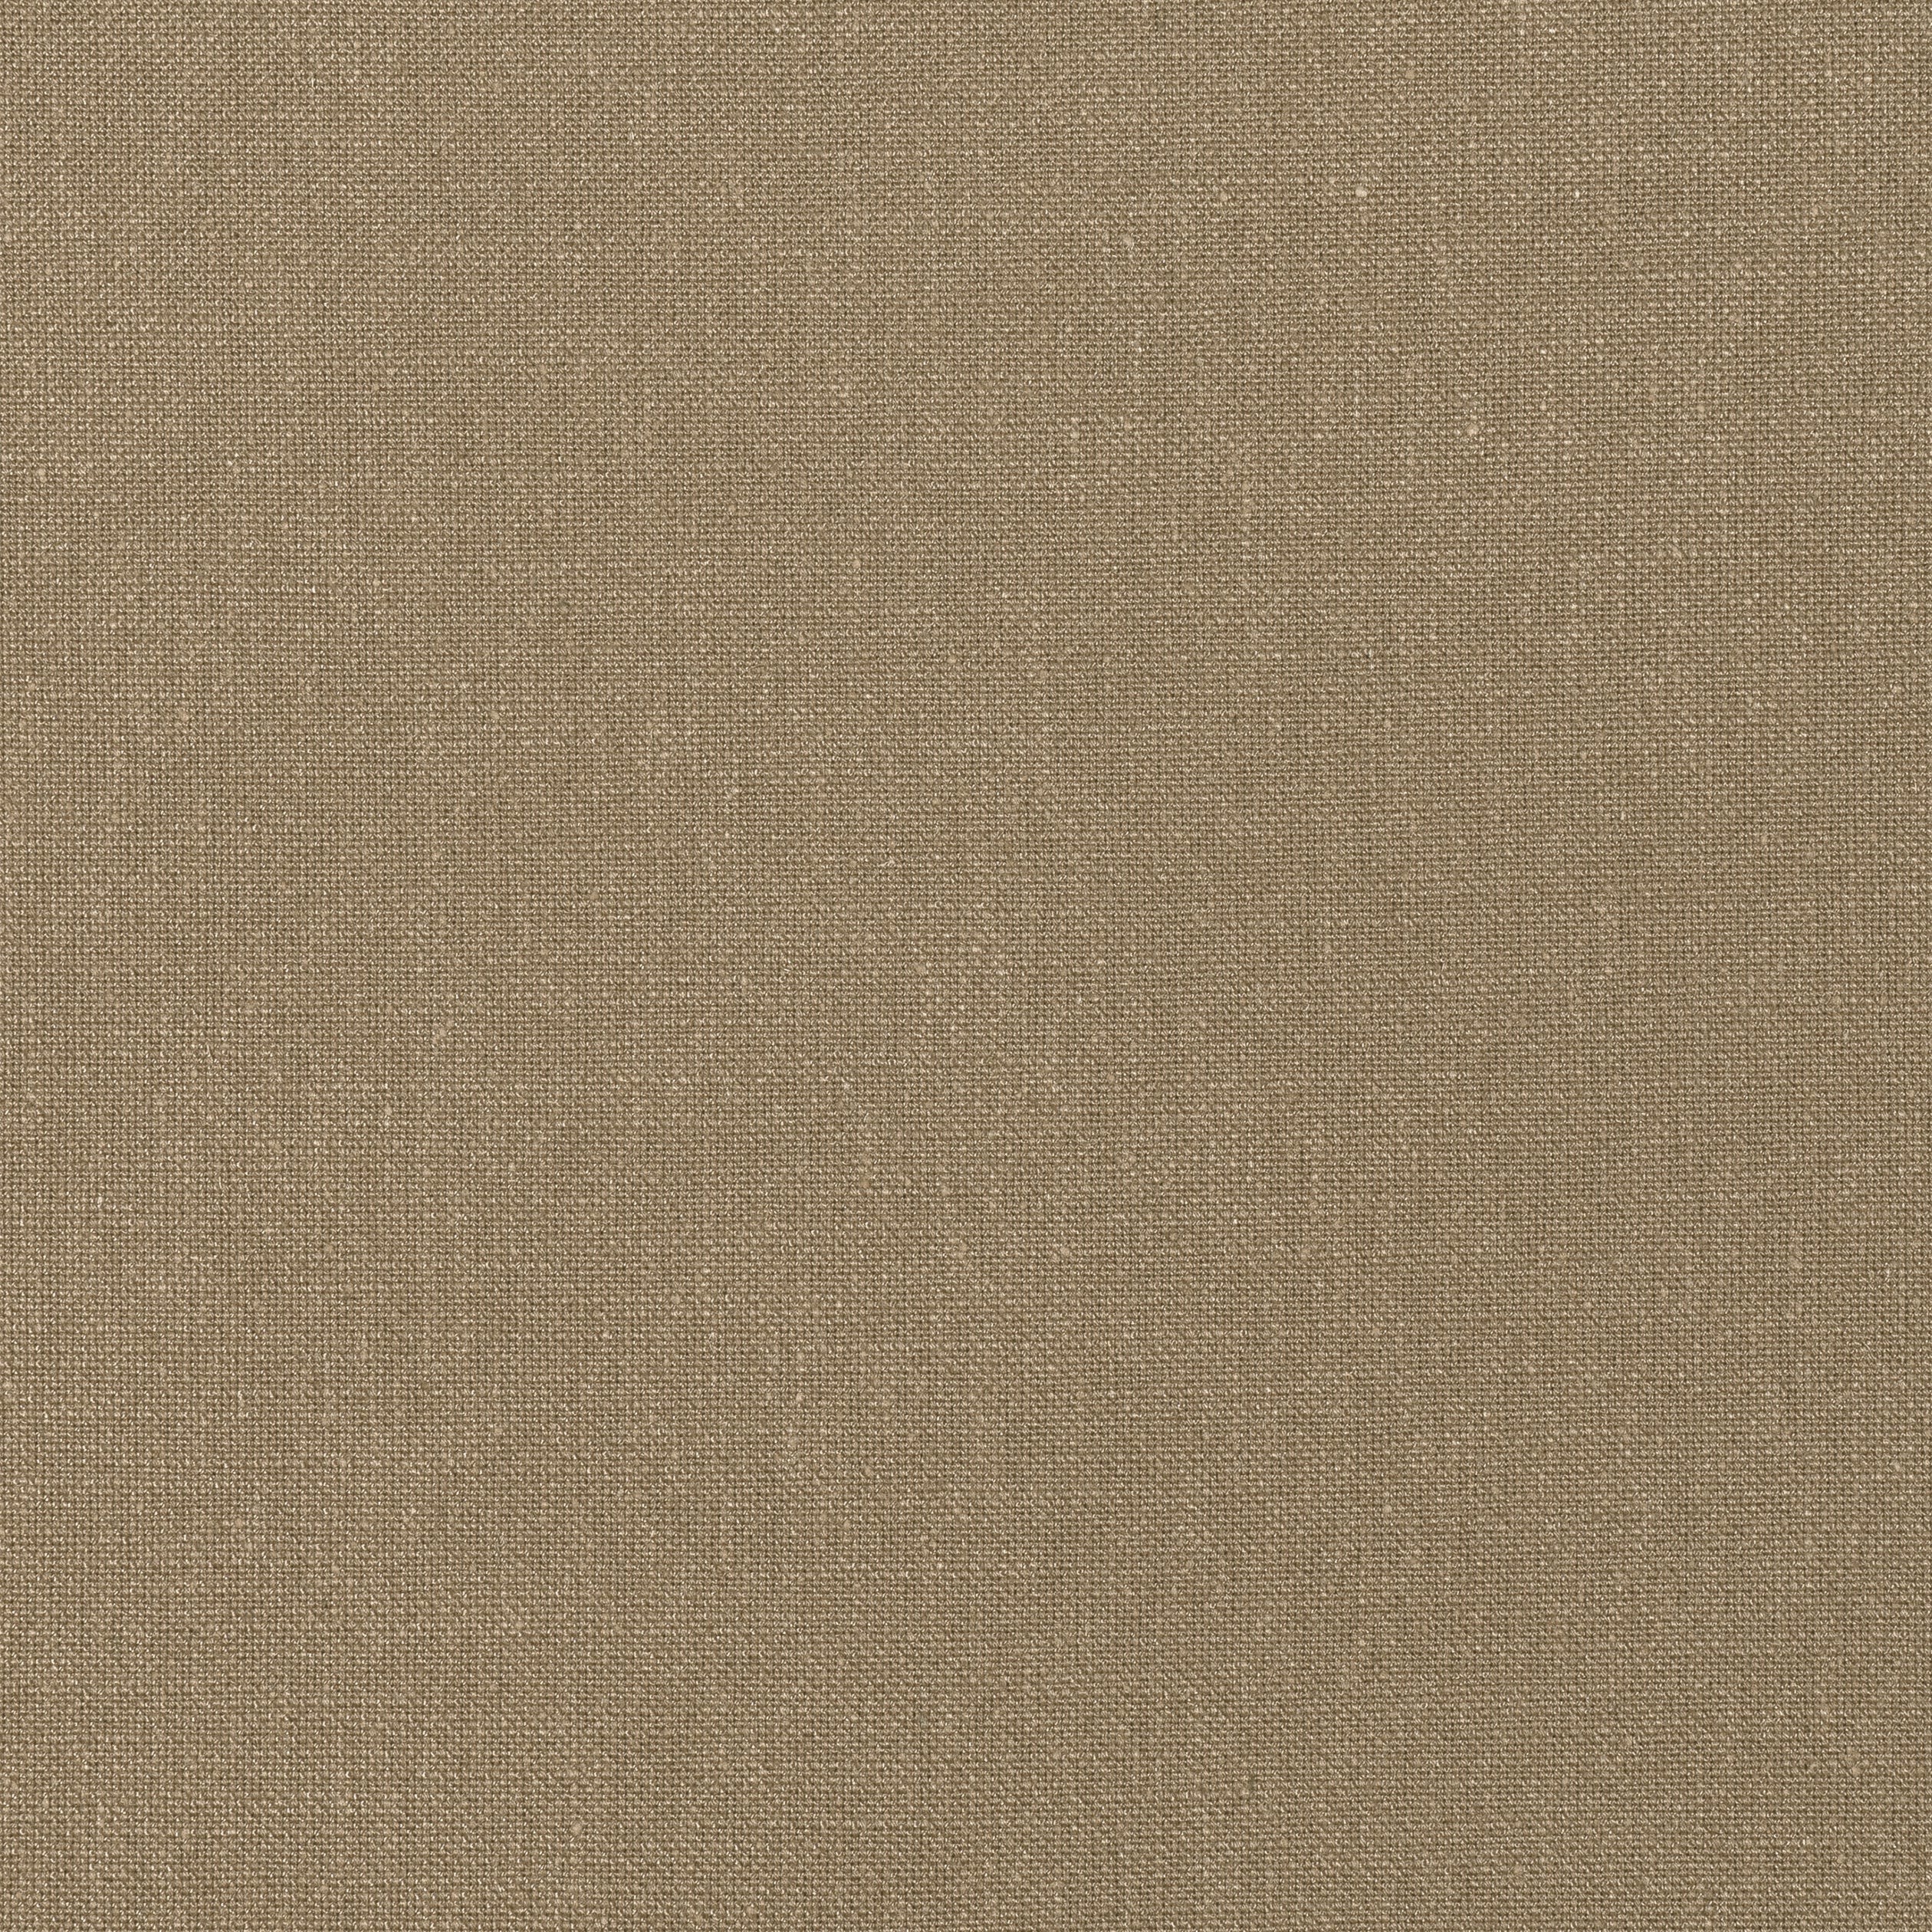 Palisade Linen fabric in taupe color - pattern number FWW7660 - by Thibaut in the Palisades collection